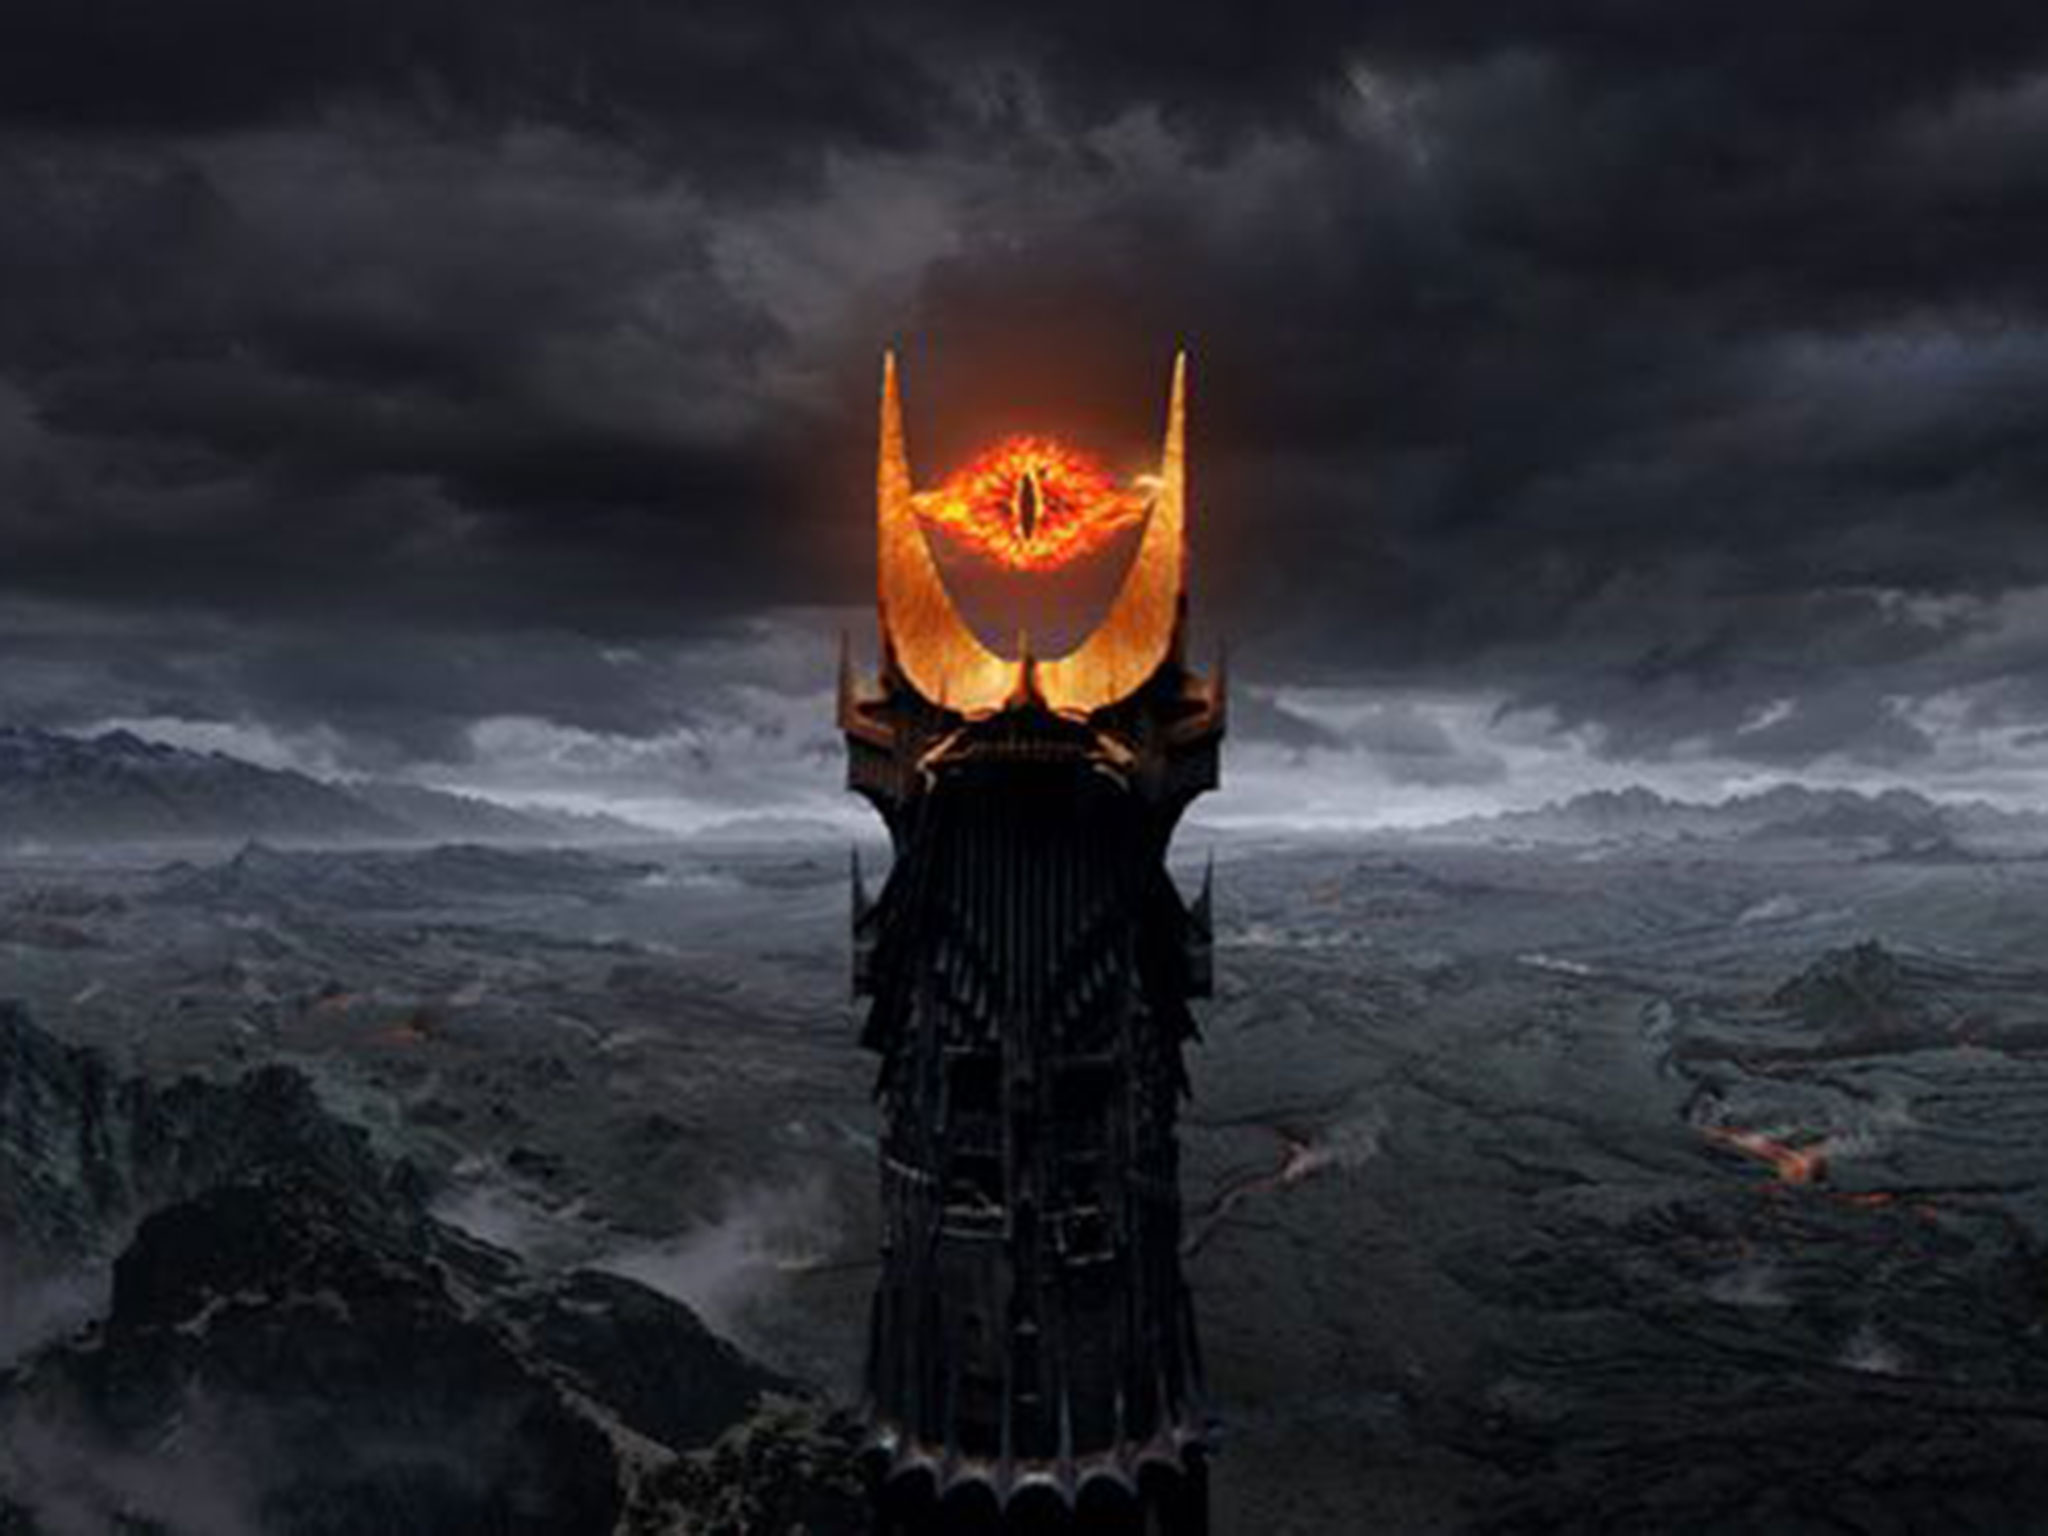 Lord of the Rings eye of Sauron - Ghtic.com - Blog